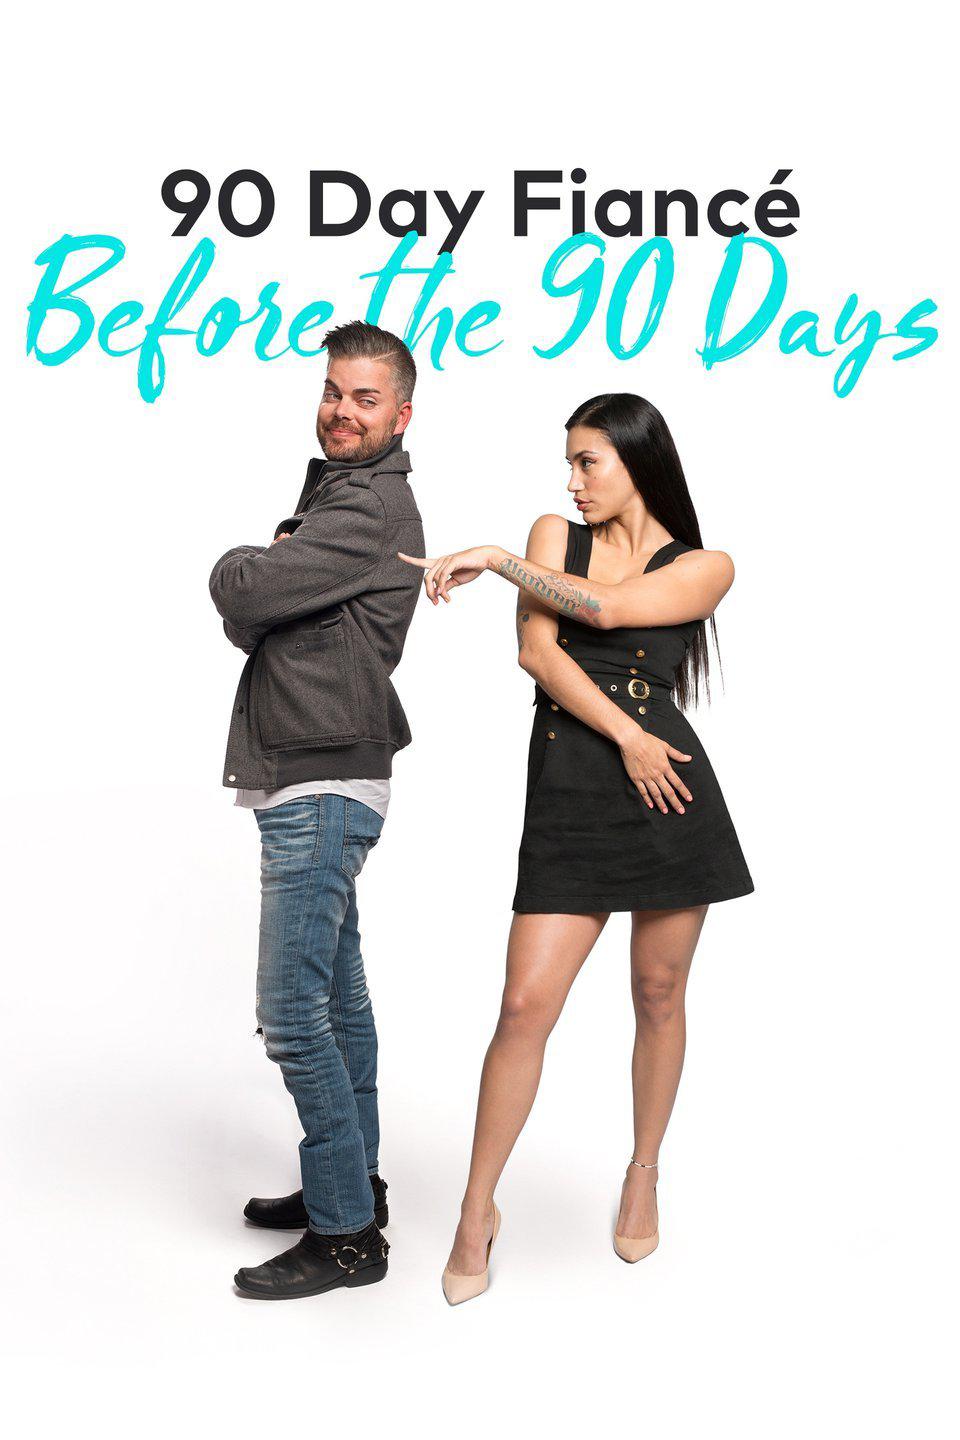 TV ratings for 90 Day Fiancé: Before The 90 Days in Suecia. TLC TV series